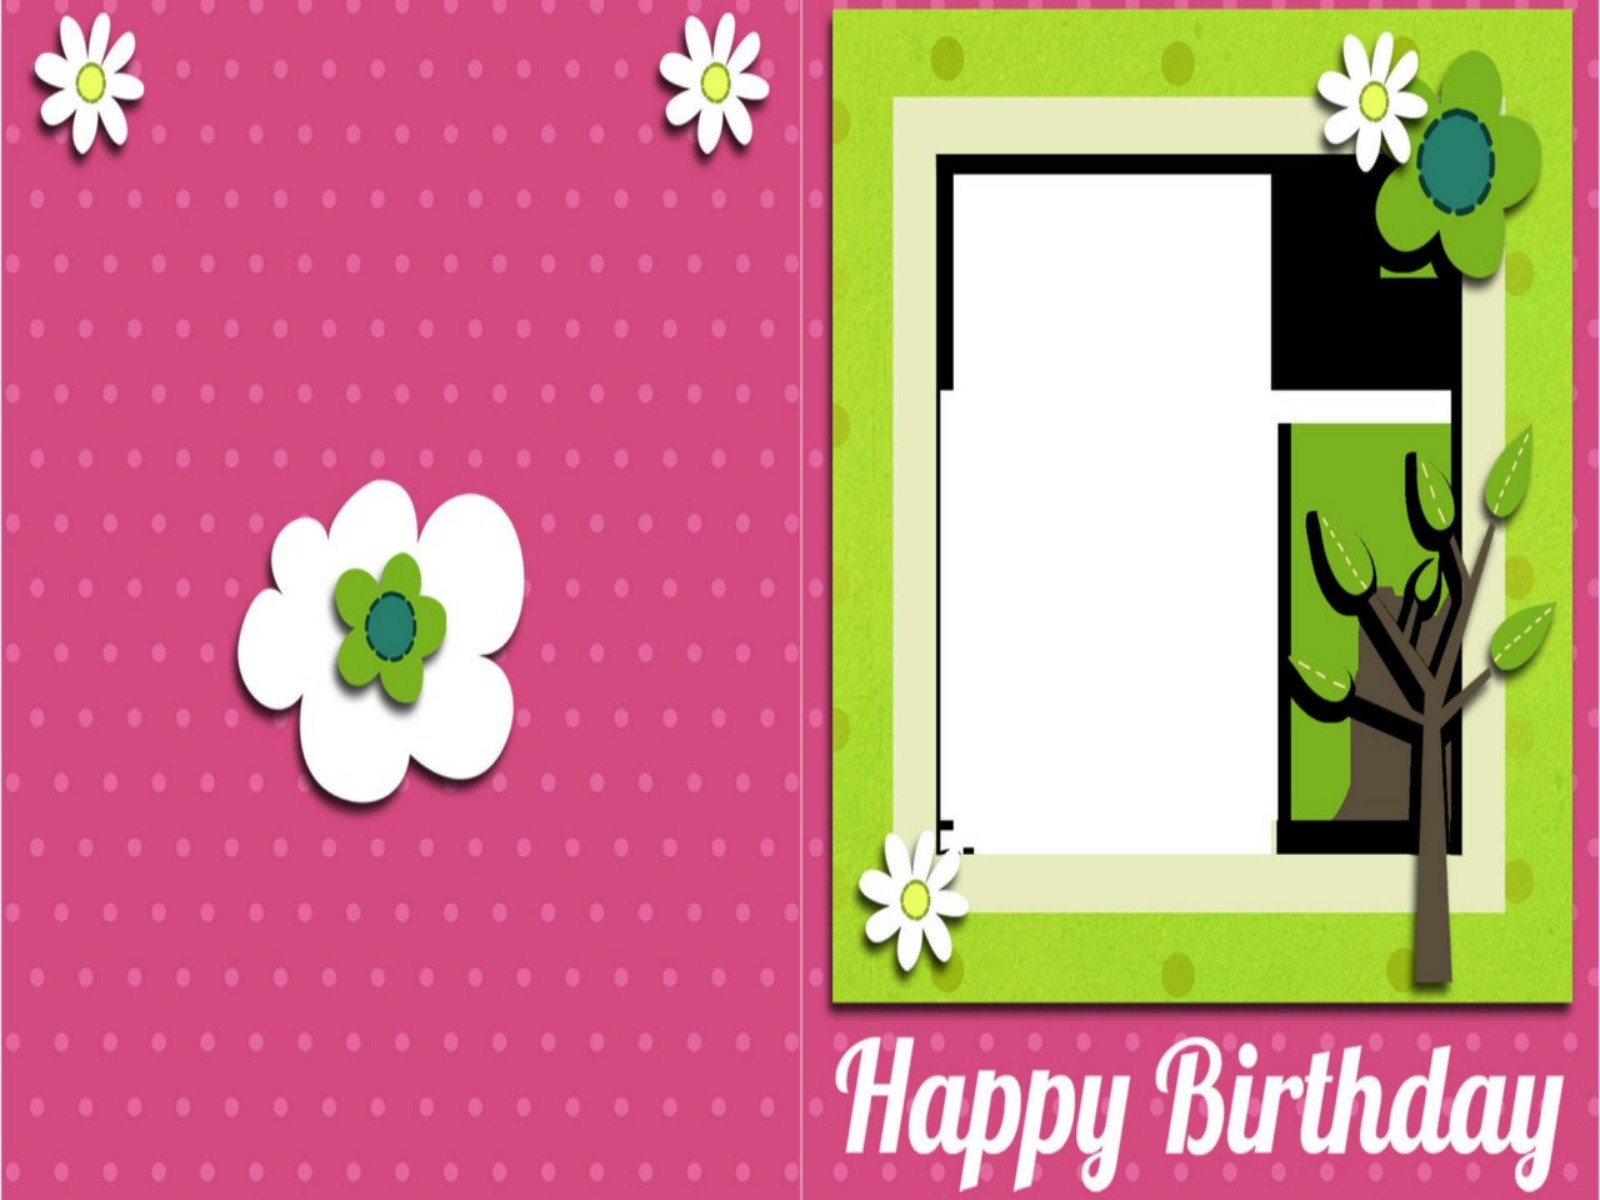 Happy BirtHDay Pictures For Husband Photo Wallpaper